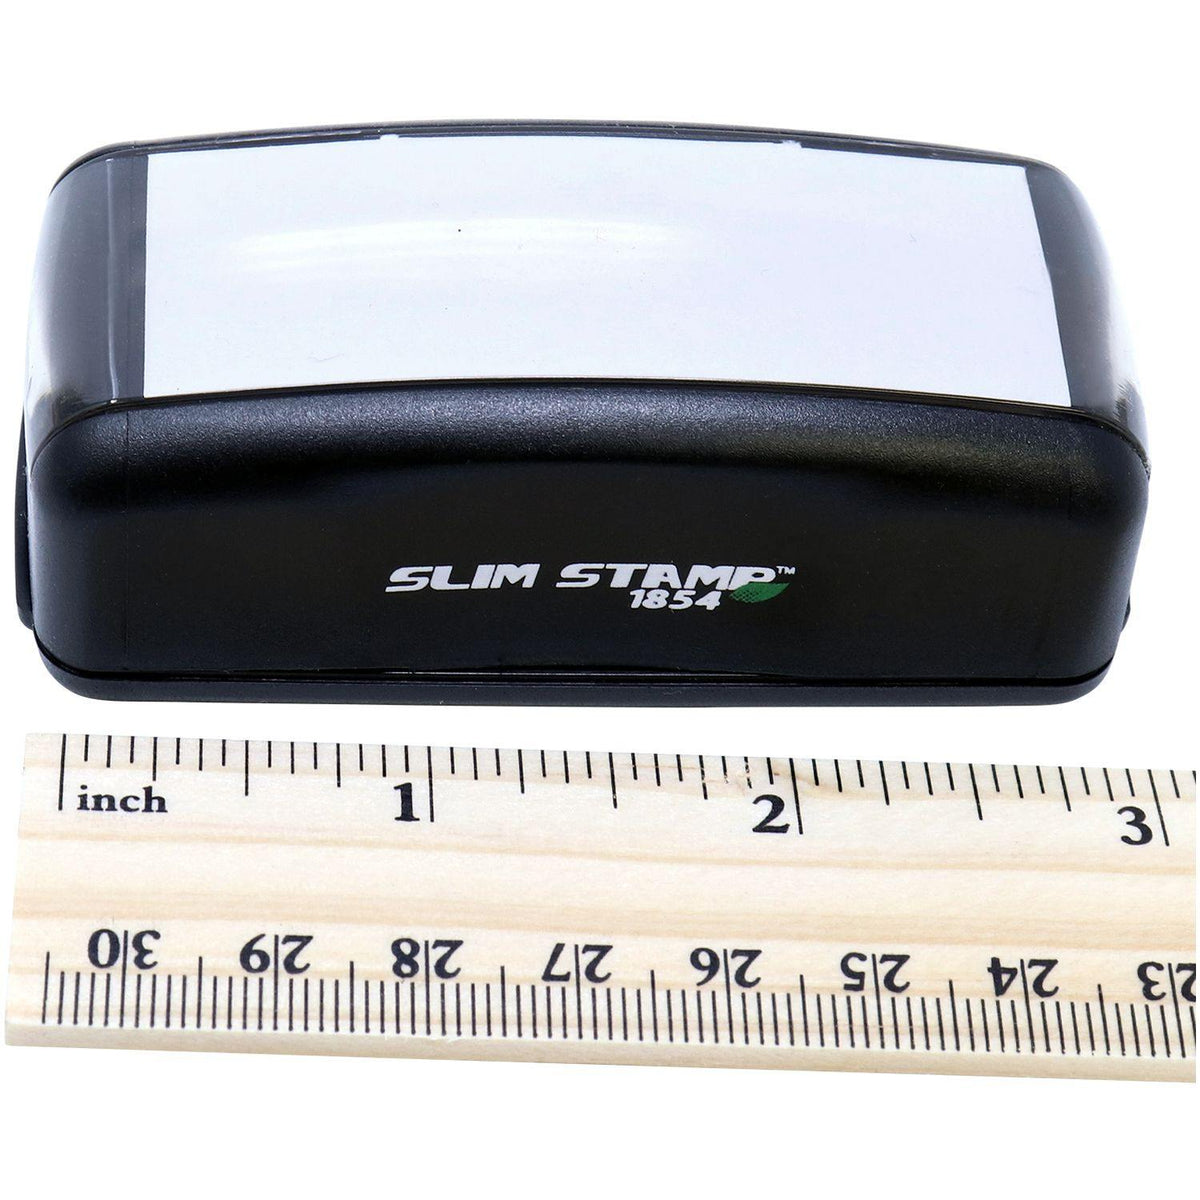 Measurement Large Pre-Inked Bold Draft Stamp with Ruler